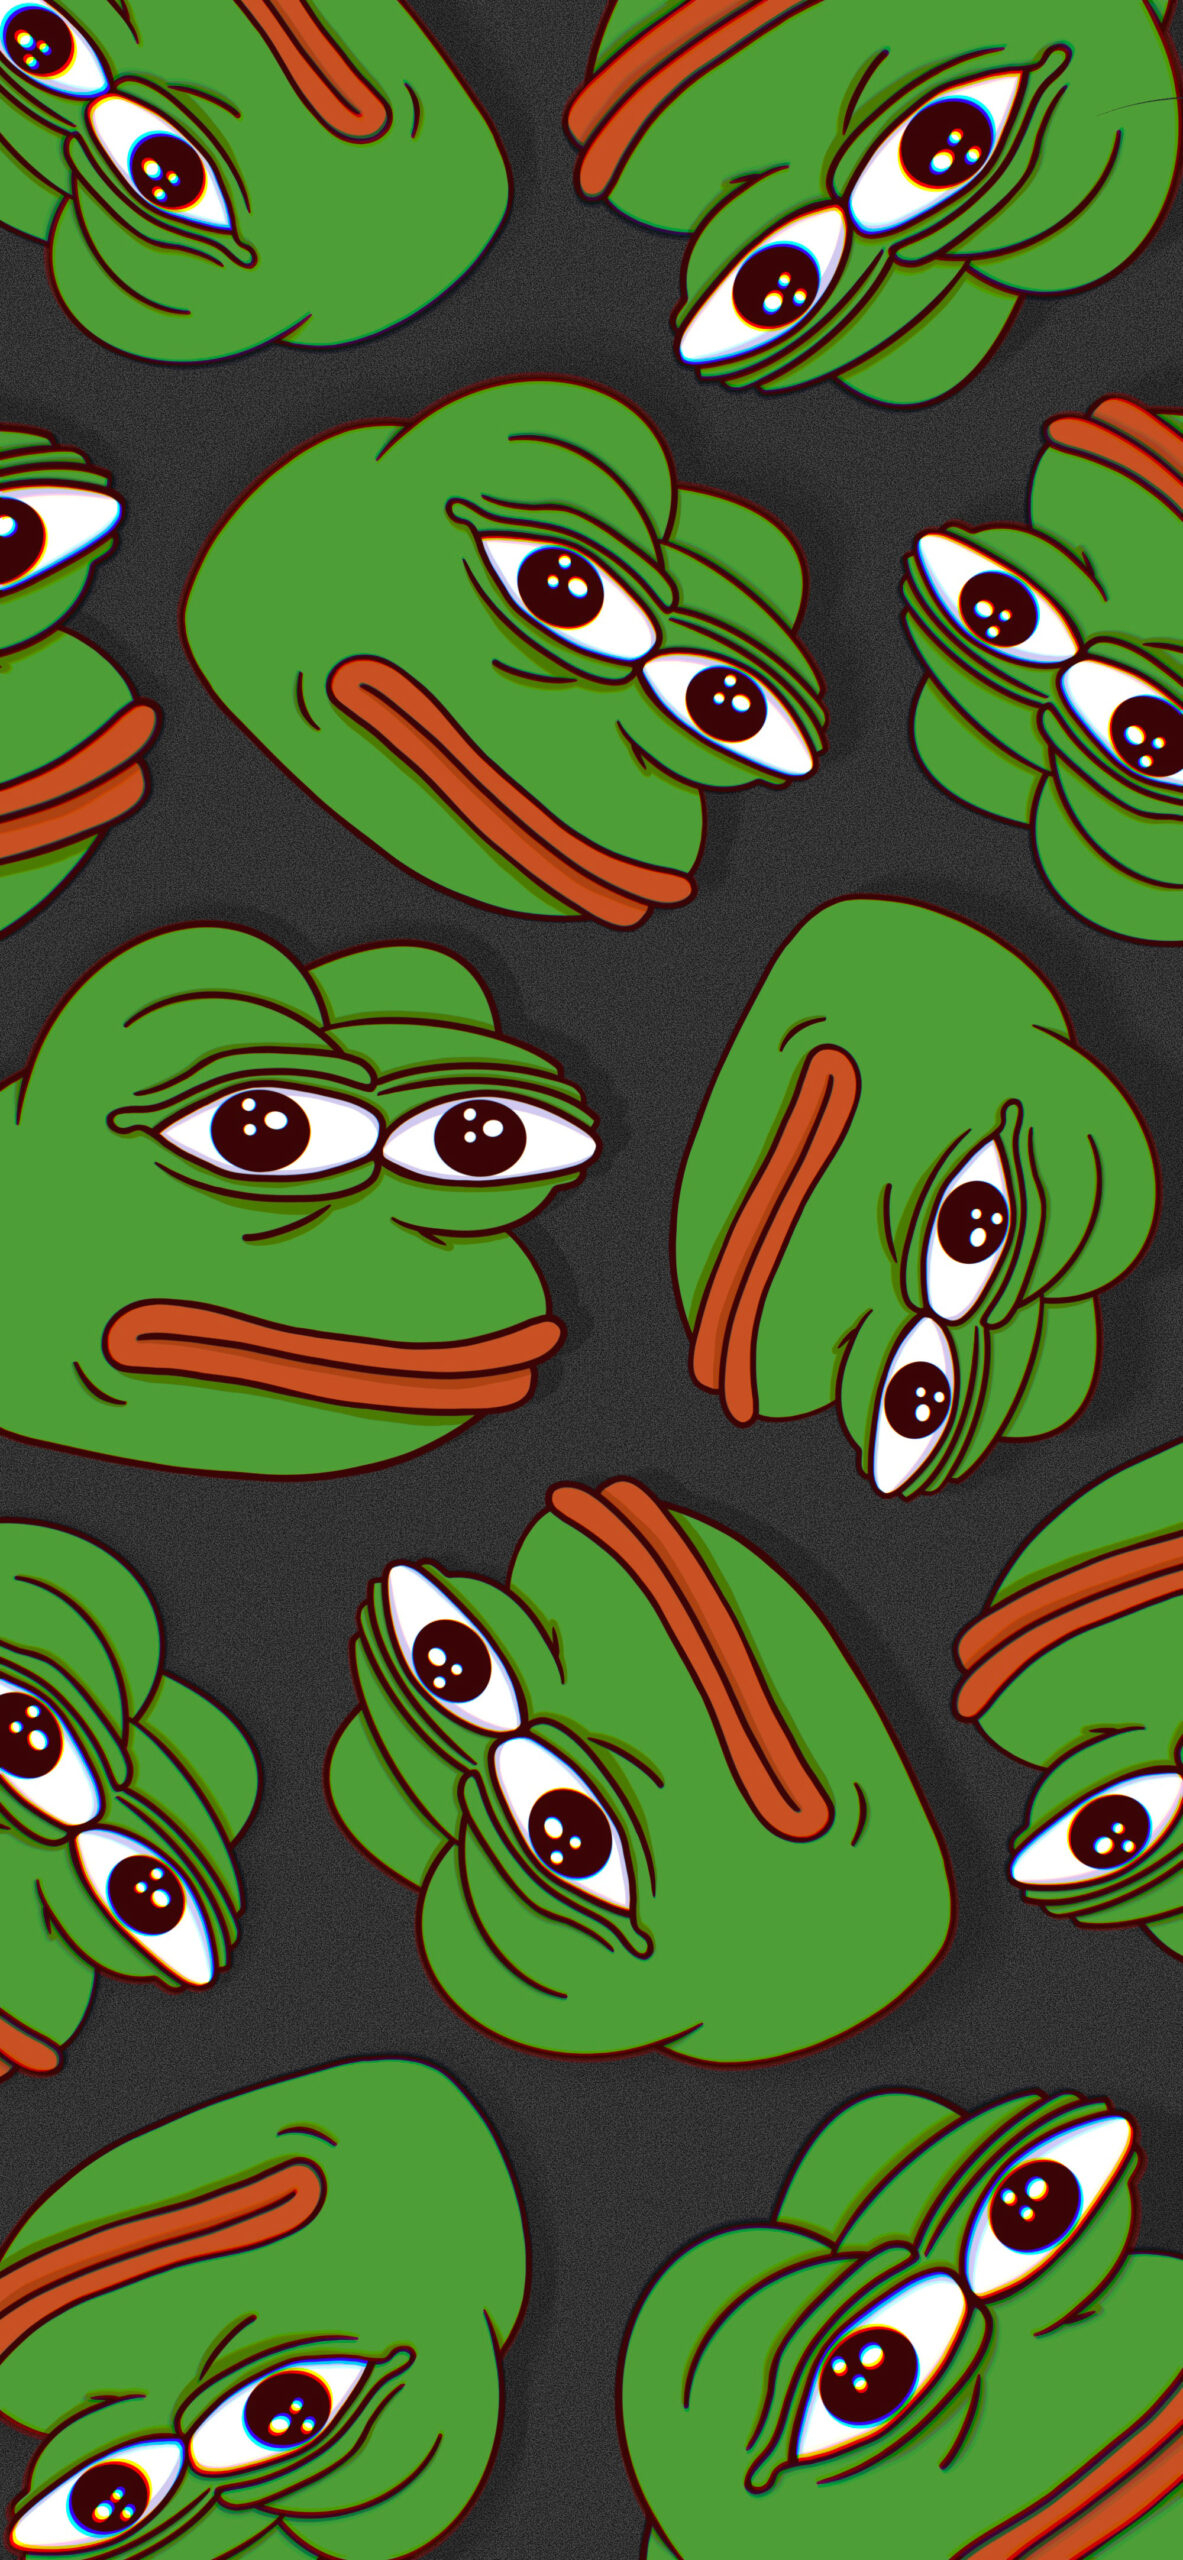 1183x2560 Pepe the Frog Wallpapers for Phone HD Meme Wallpapers with Pepe